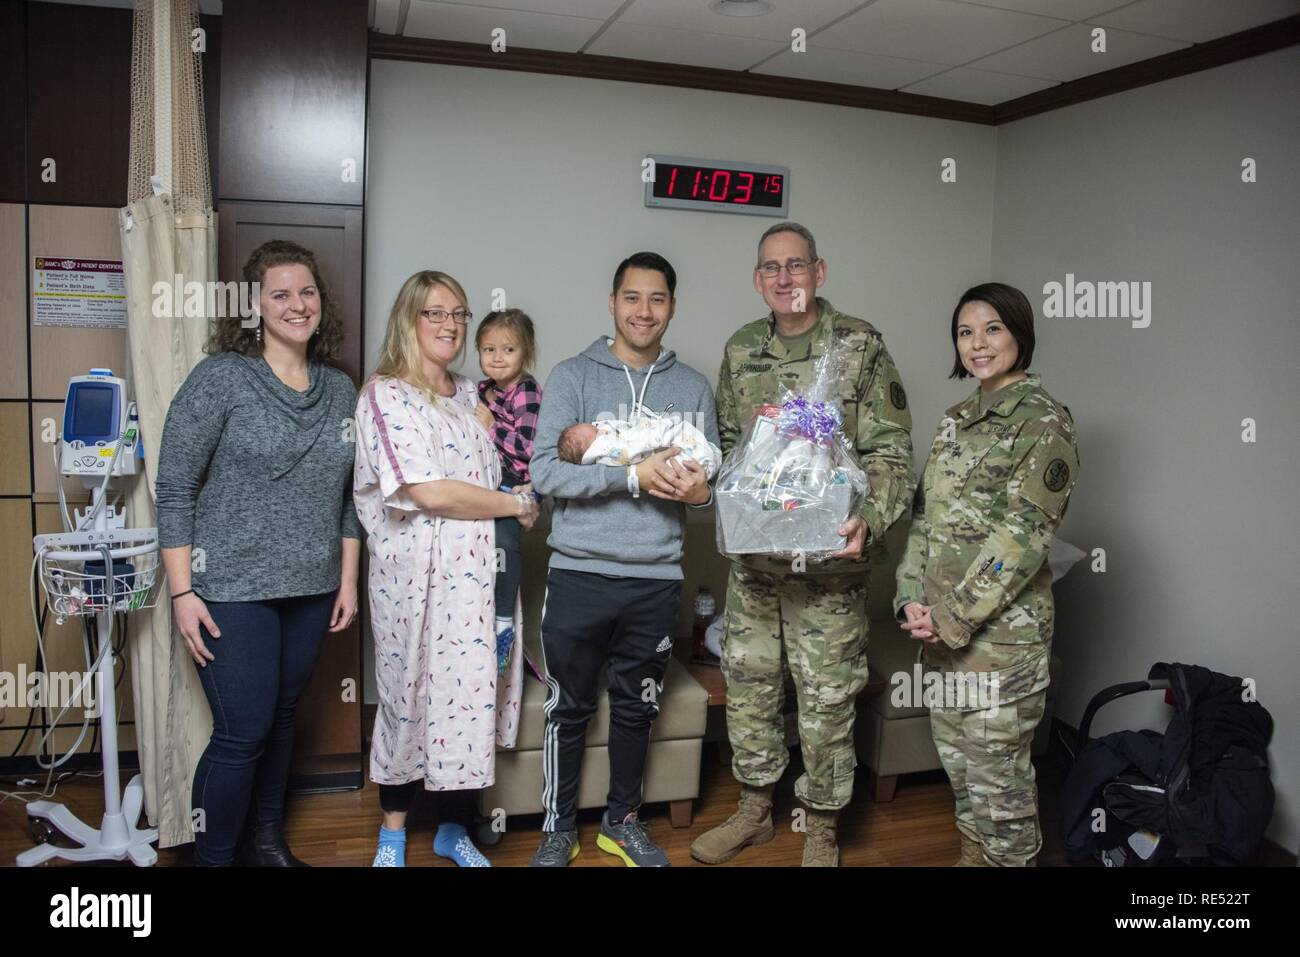 Brig. Gen. George N. Appenzeller, Brooke Army Medical Center commander, along with Sarah Kelly, BAMC auxiliary president, and Master Sgt. Melinda Griffin, enlisted advisor to the deputy chief for patient support, present a gift basket to retired Army Sgt. Christopher and Hillary Hunt after the birth of their son, Callum Charles Hunt, at BAMC, Fort Sam Houston, Texas, Jan. 2, 2019. Callum, born at 1:50 a.m. on New Year’s Day, was BAMC first baby born in 2019. Stock Photo